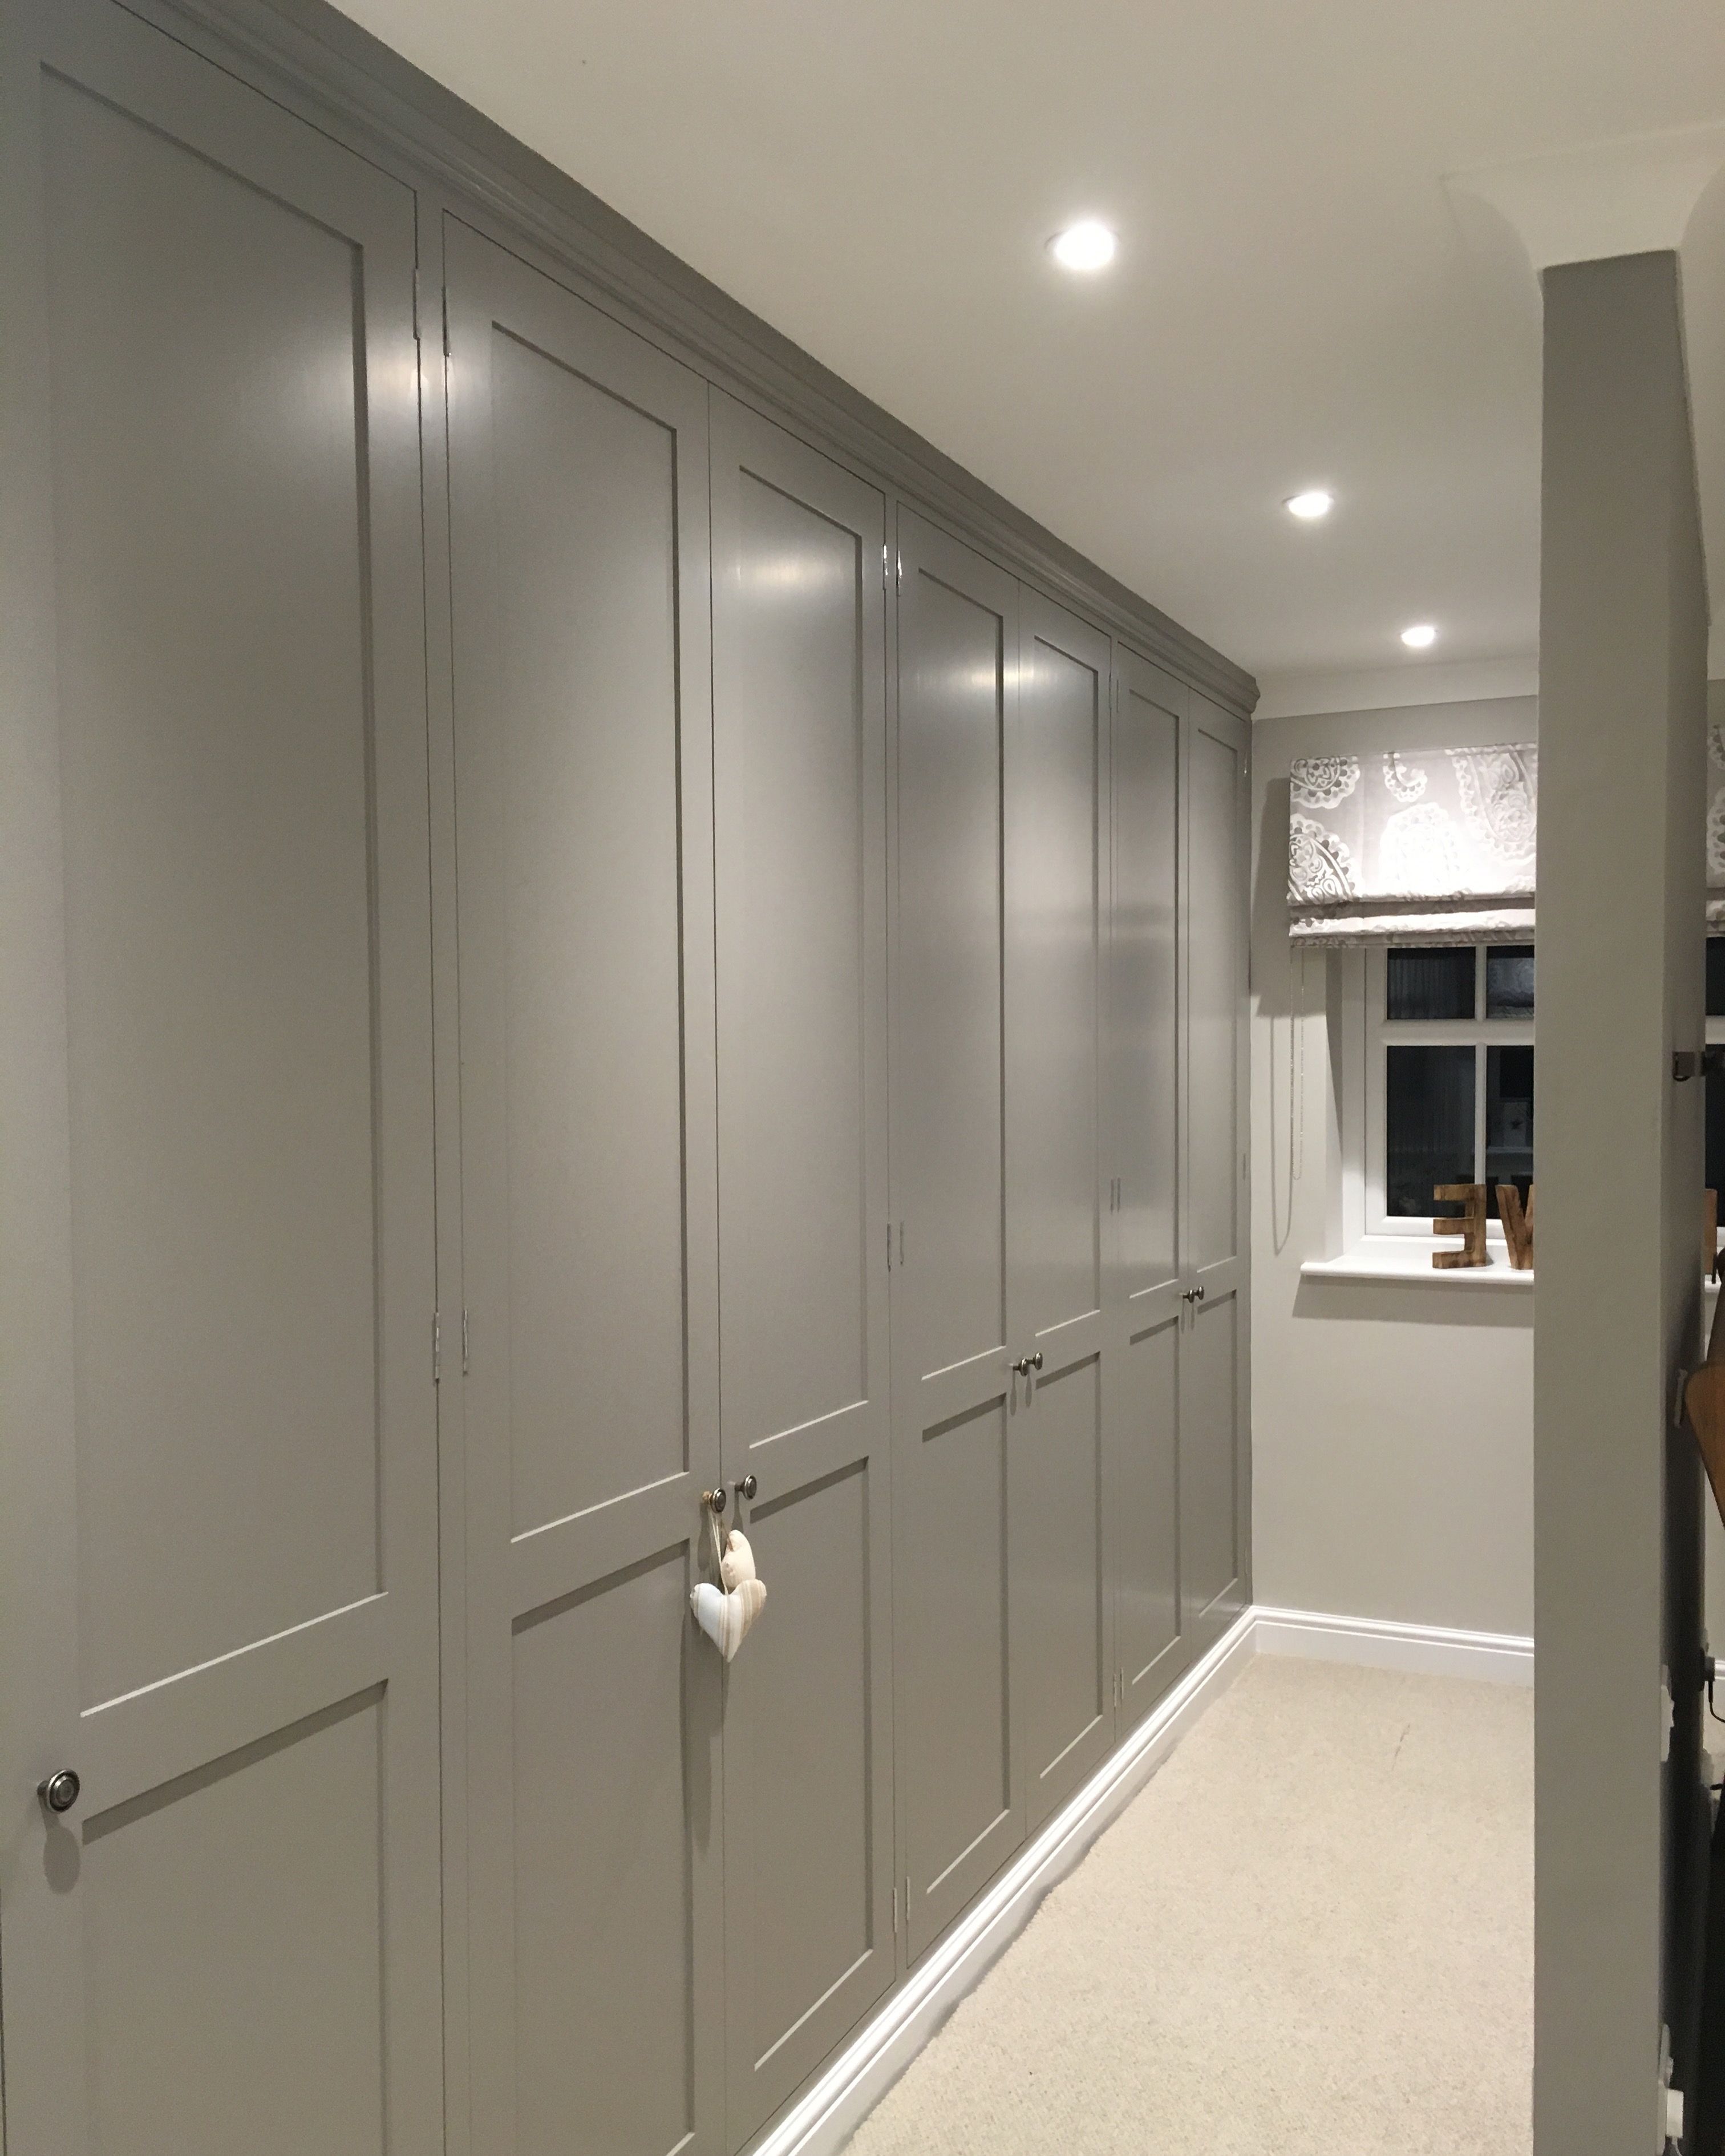 Our Homenew Built In Wardrobes Painted Farrow And Ball Worsted | Built  In Wardrobe Doors, Built In Cupboards Bedroom, Bedroom Decor Inspiration Intended For Farrow And Ball Painted Wardrobes (View 4 of 20)